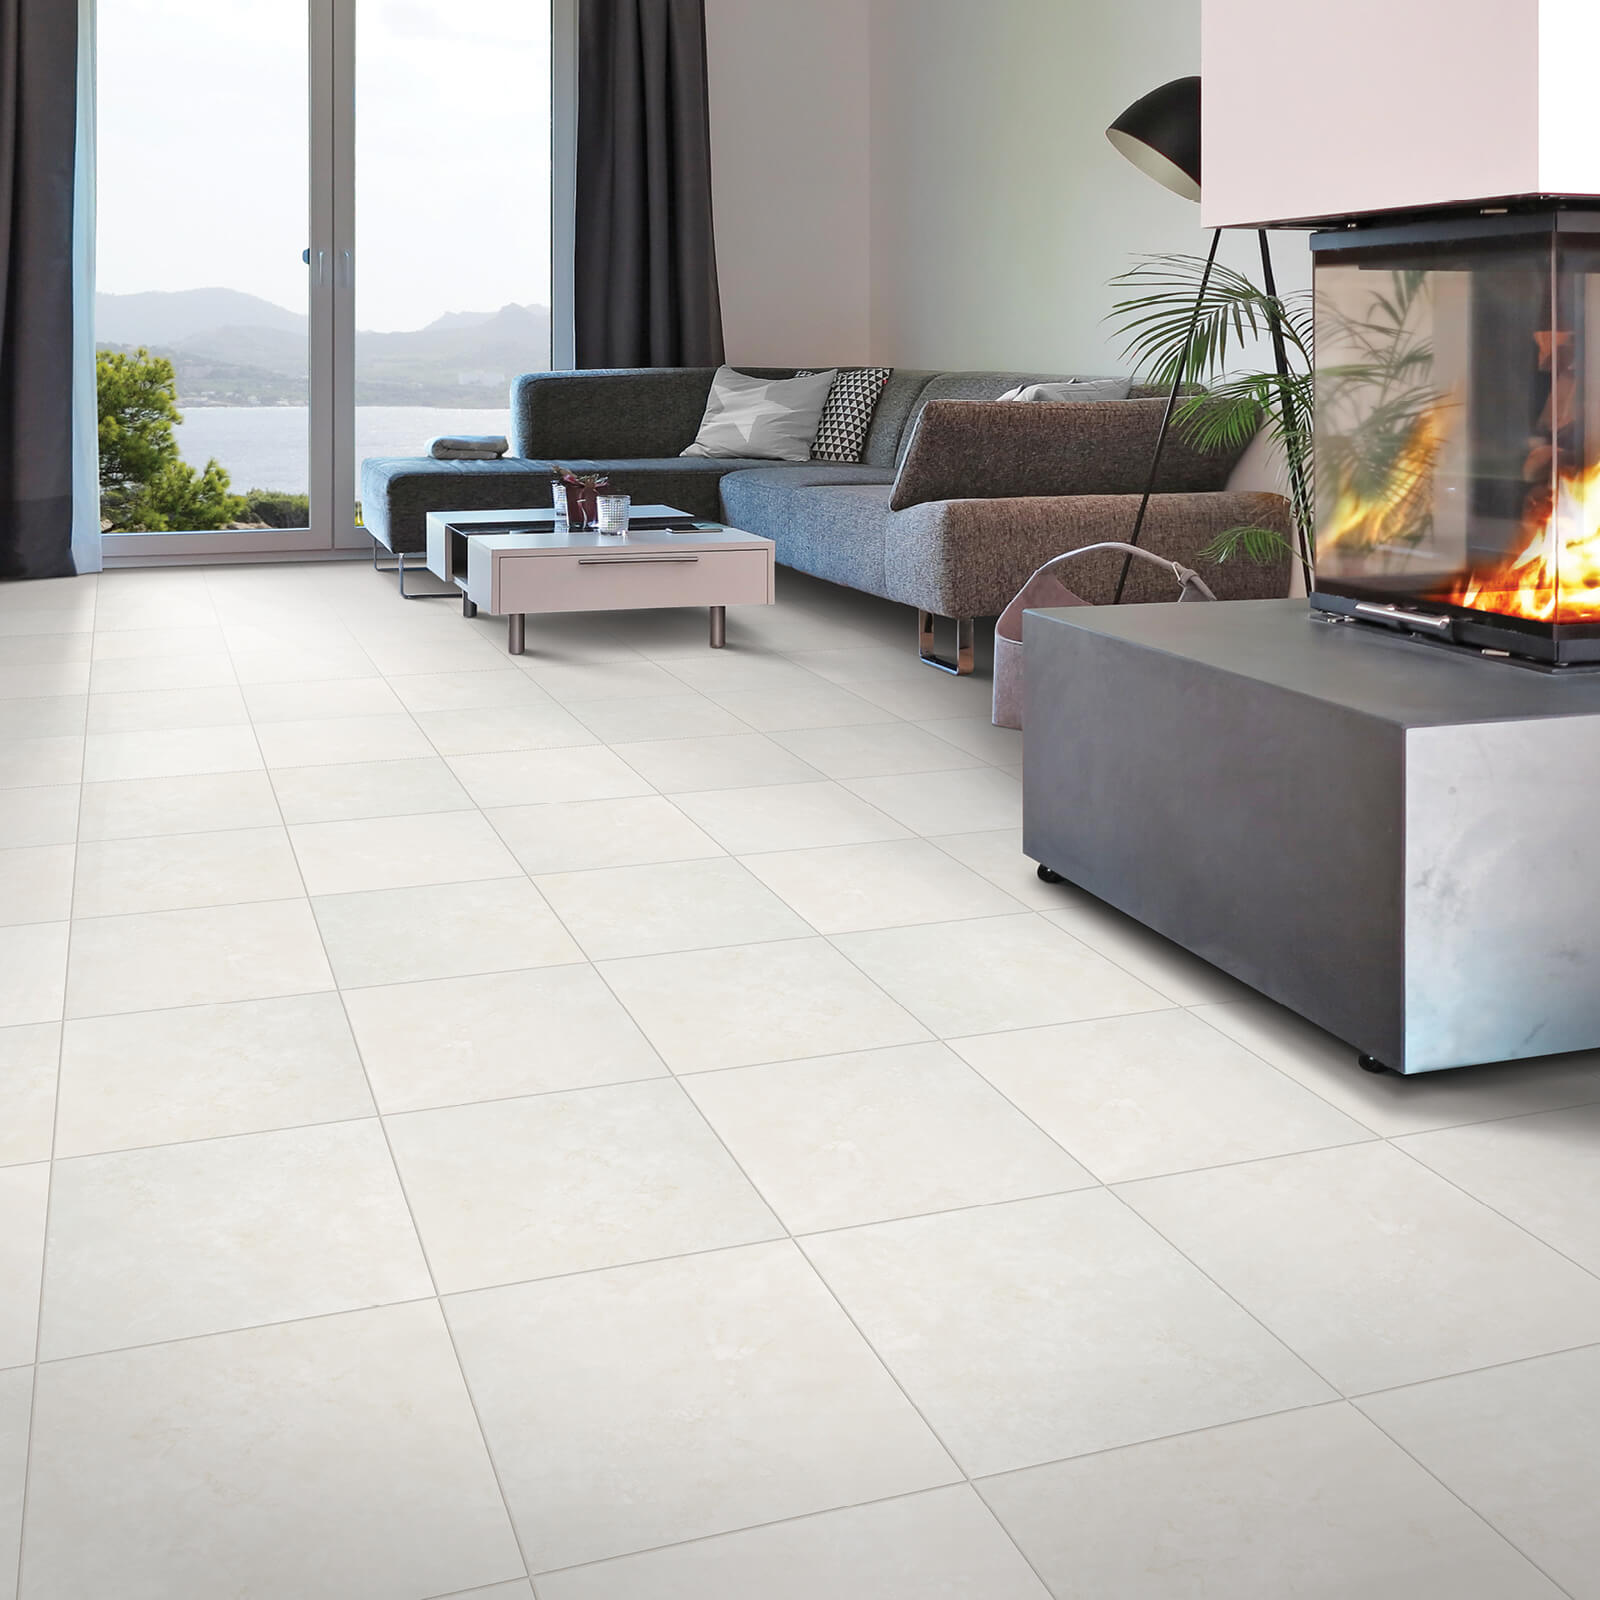 The Latest Looks in Tile & Stone Flooring